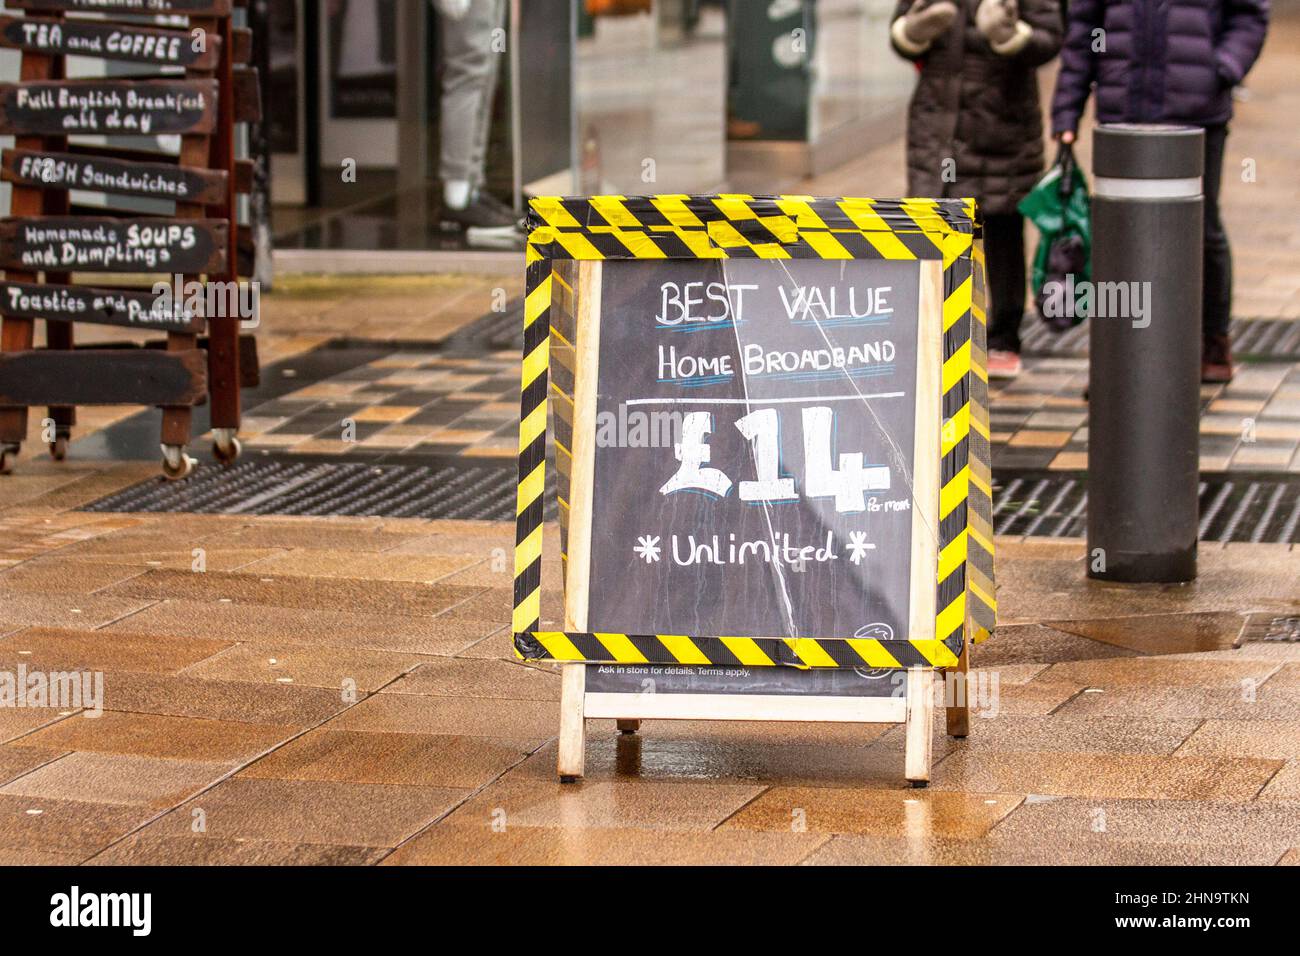 Best Value Home broadband £14 unlimited pavement hazard sign outside Three mobile phone shop in Preston, UK Stock Photo